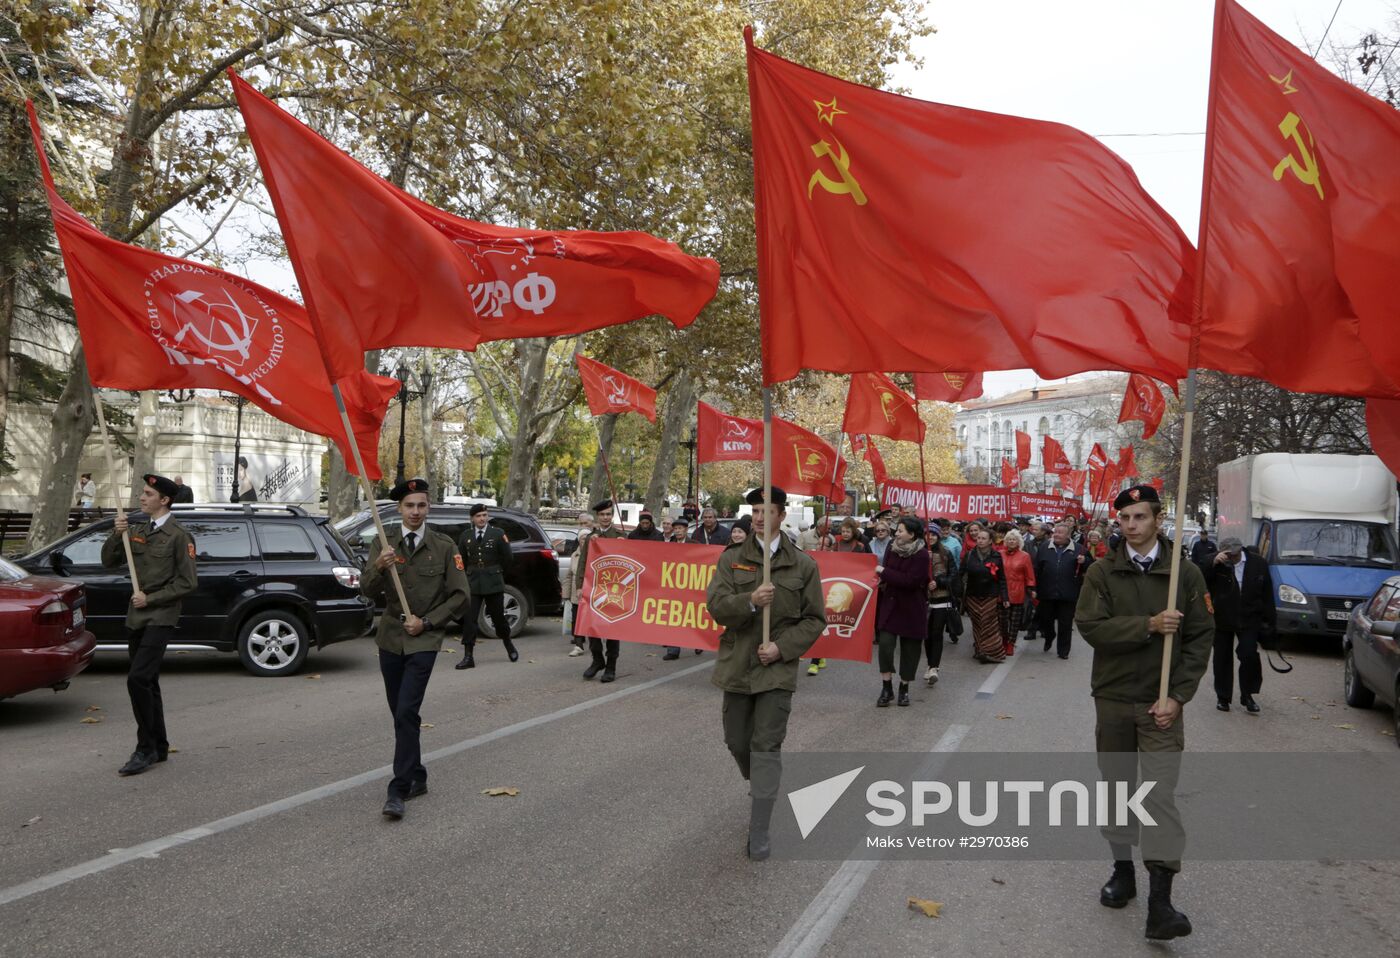 Processions marking 99th anniversary of October Revolution in Russian regions